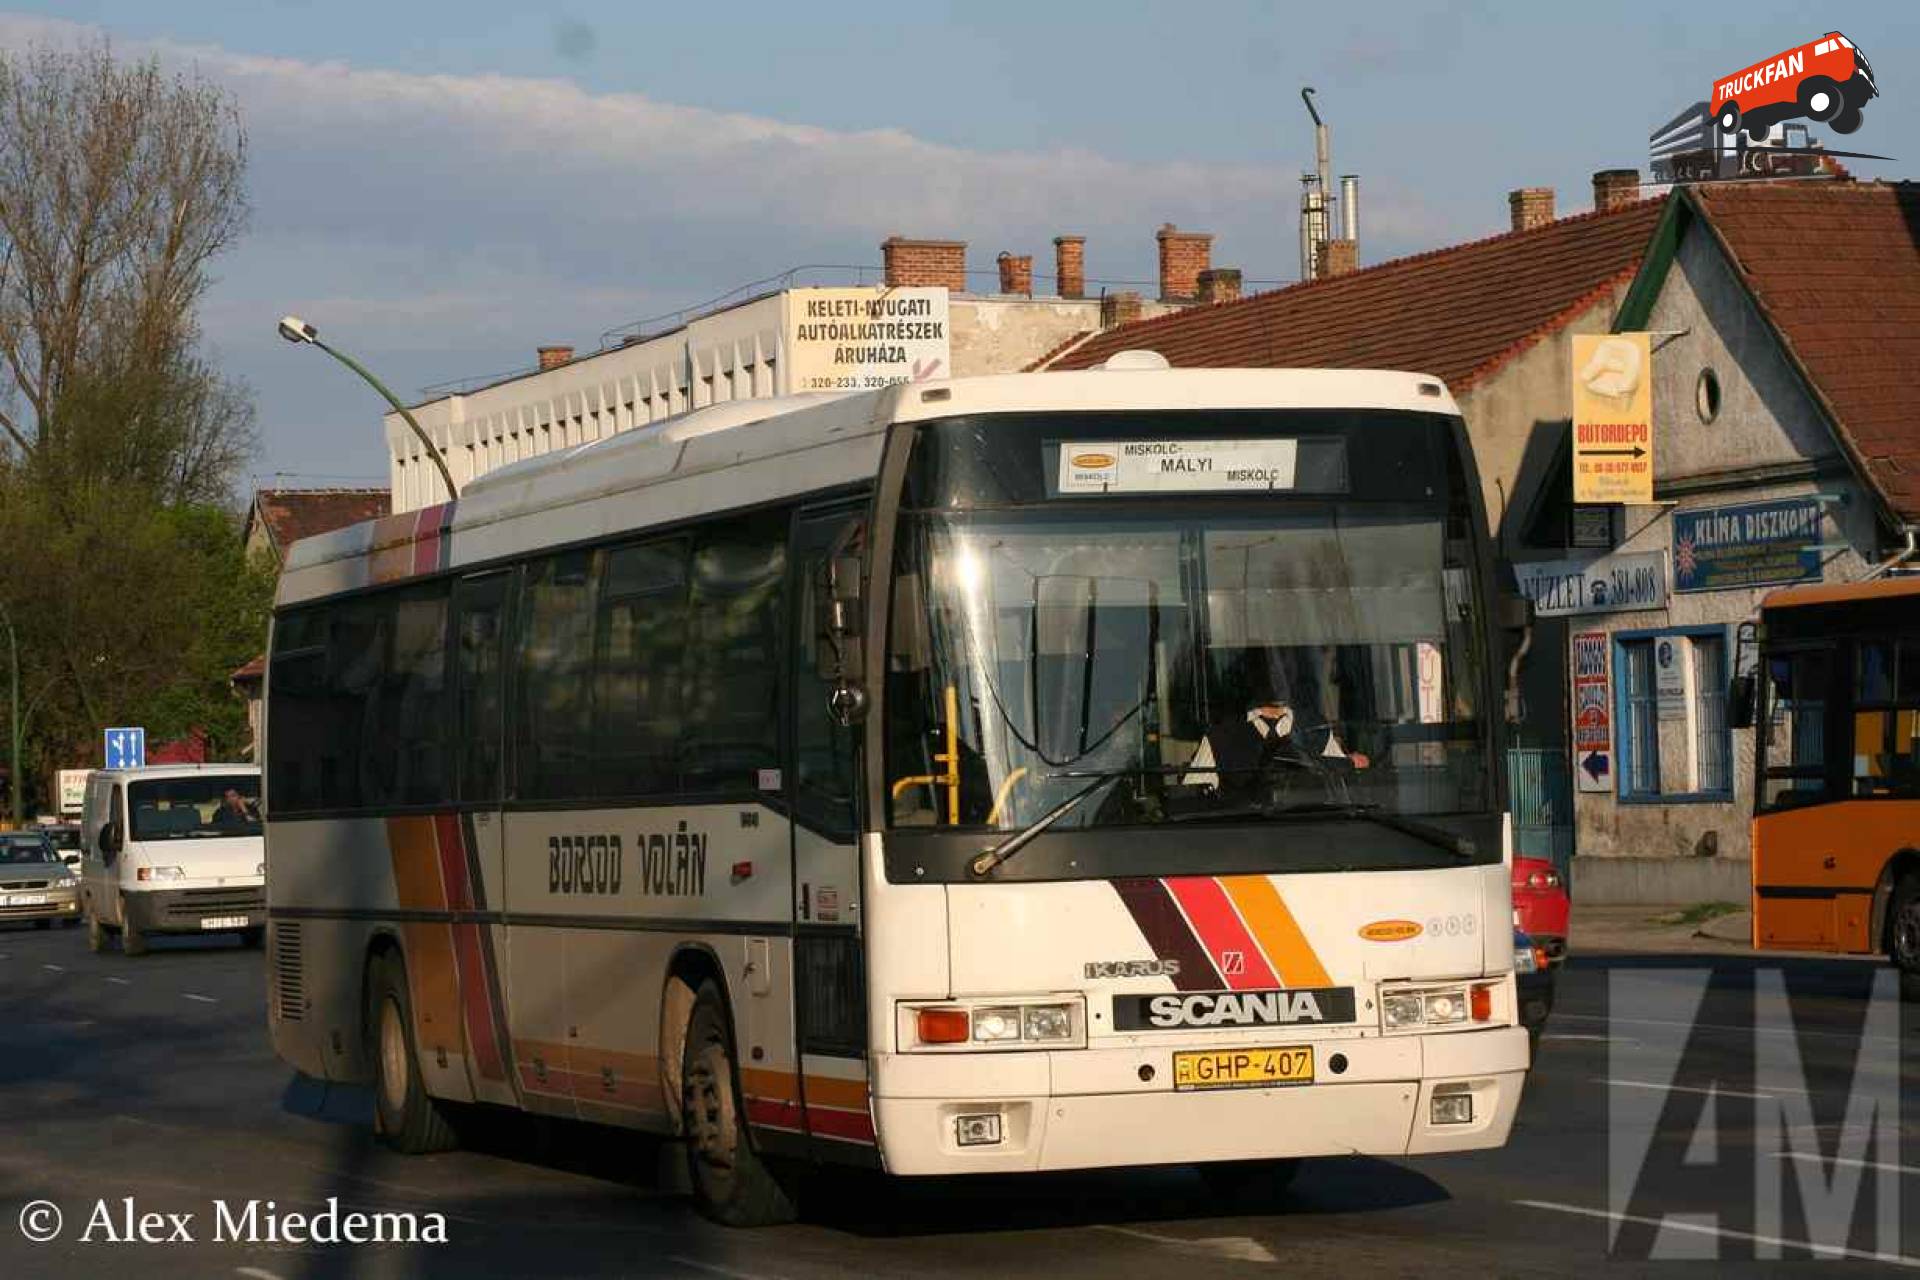 Scania buschassis